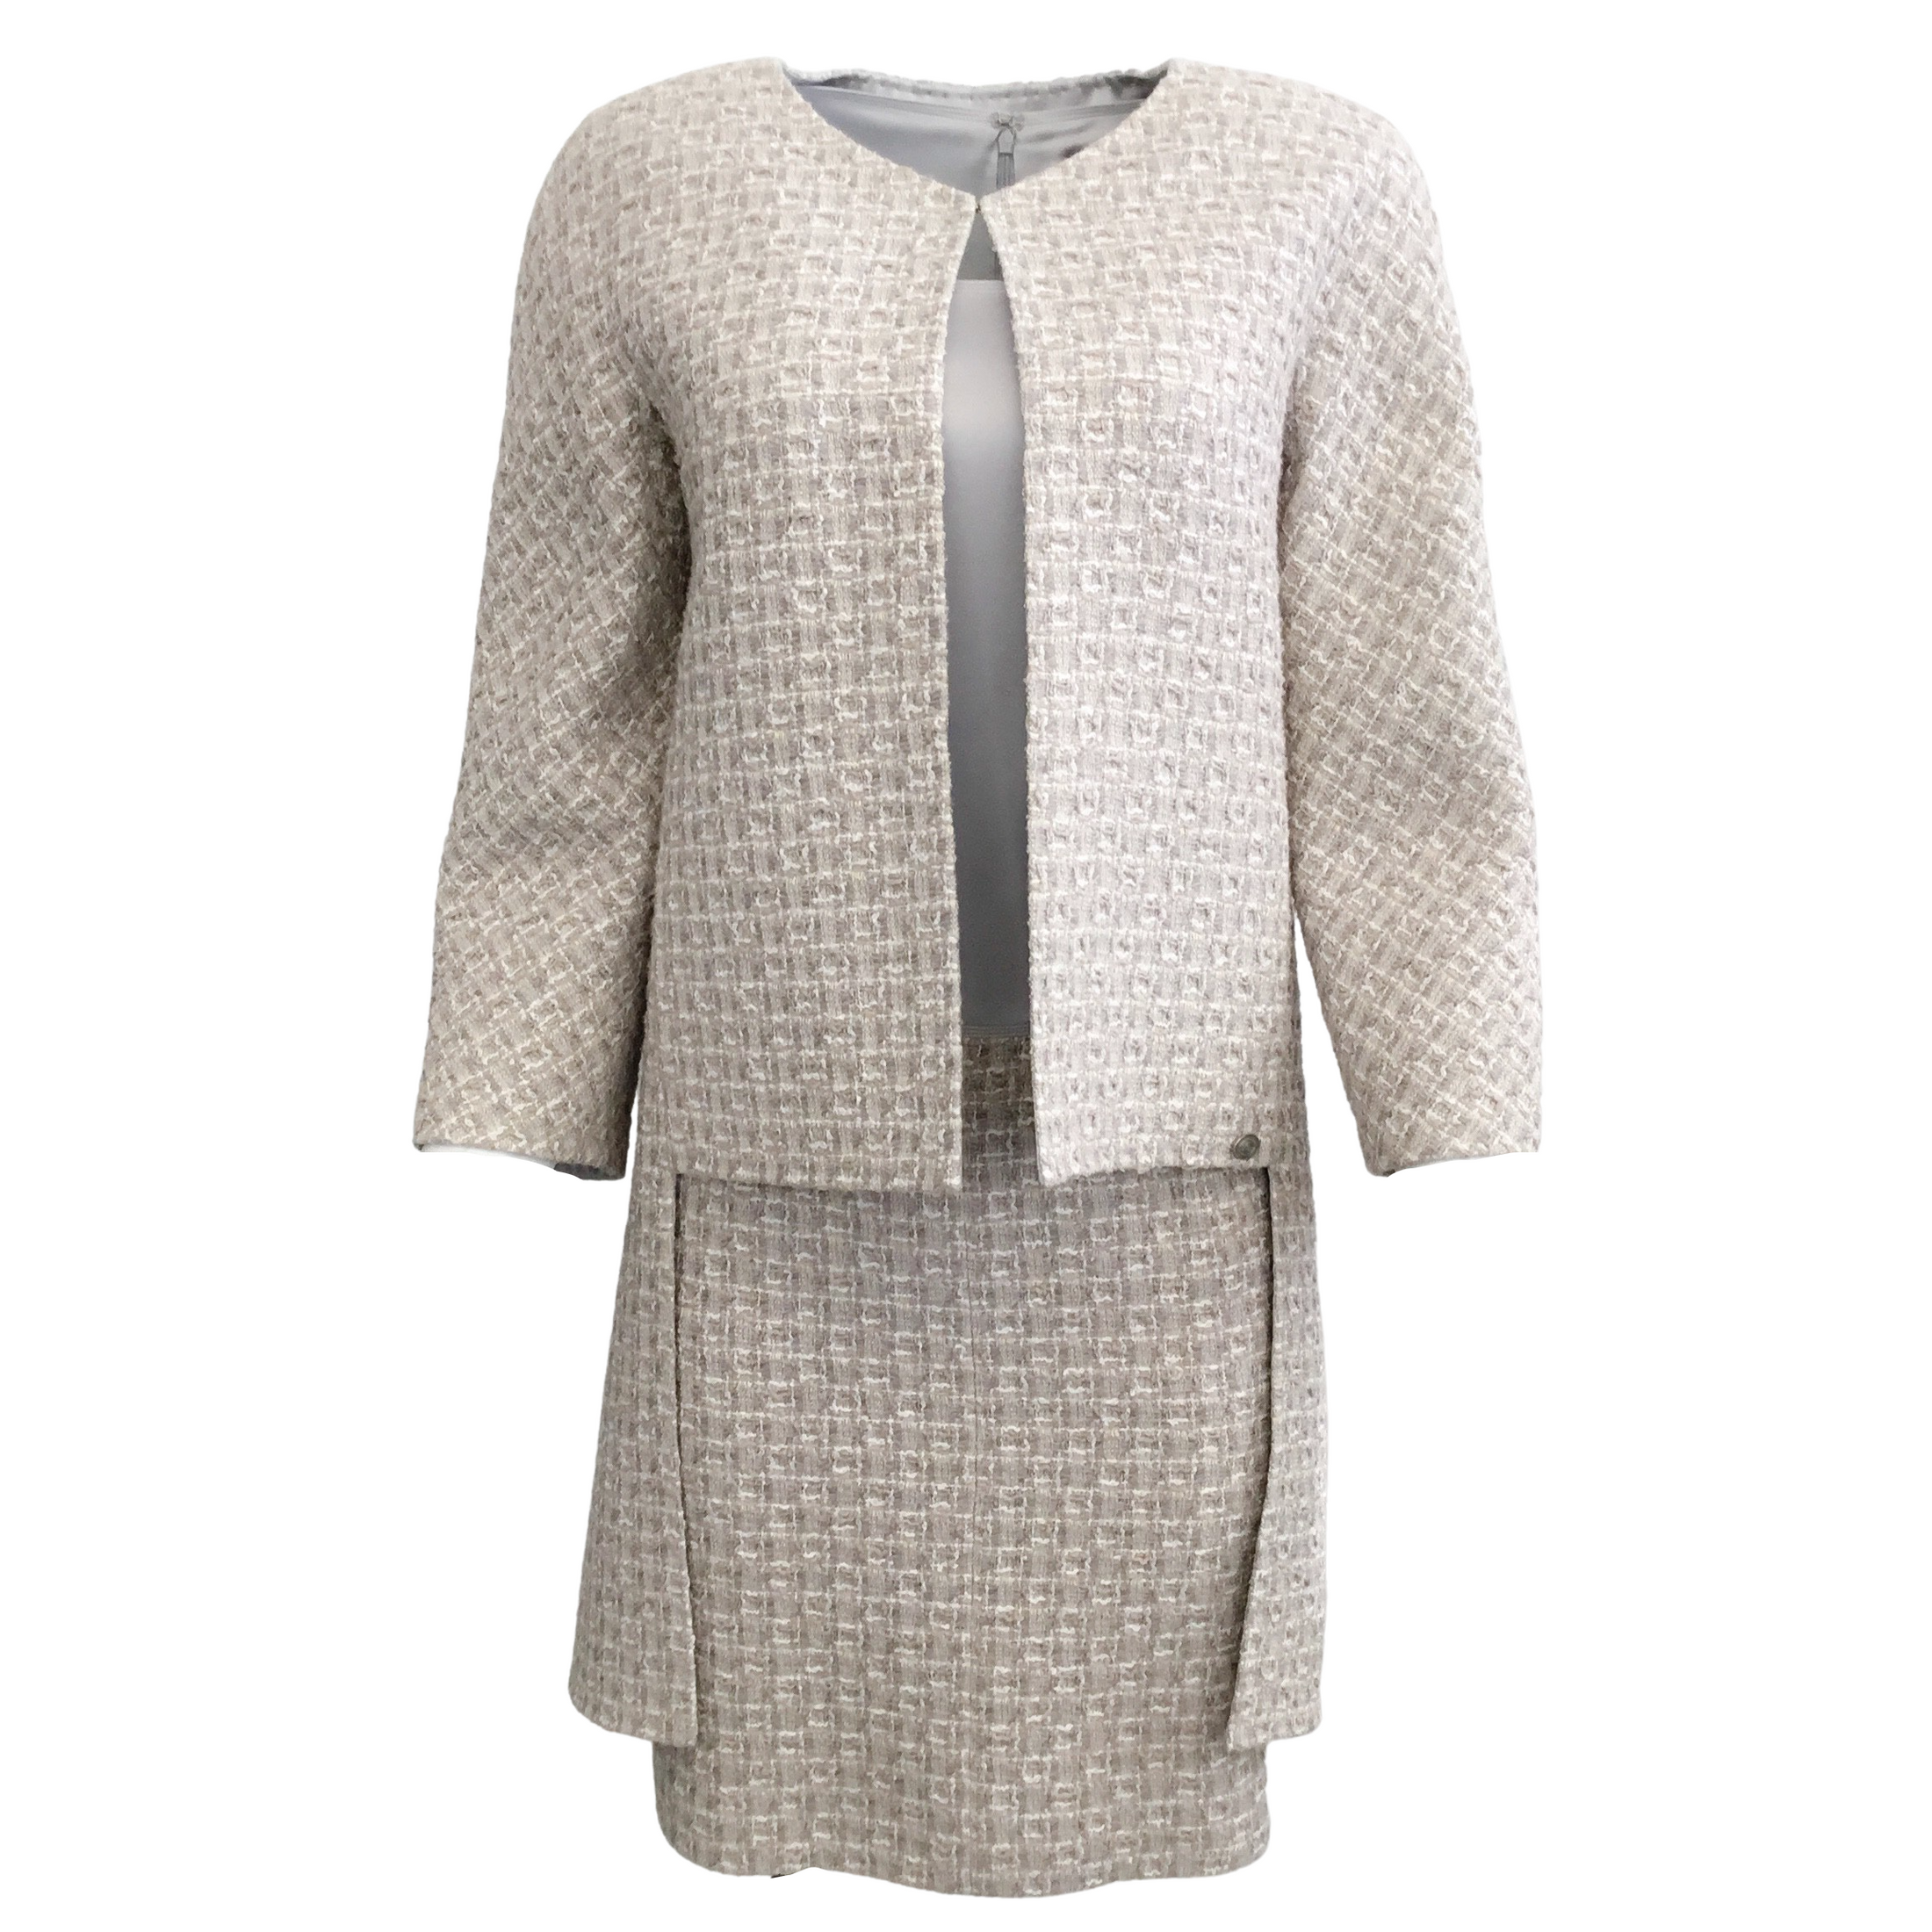 Chanel Grey Silk and Tweed Dress with Jacket 